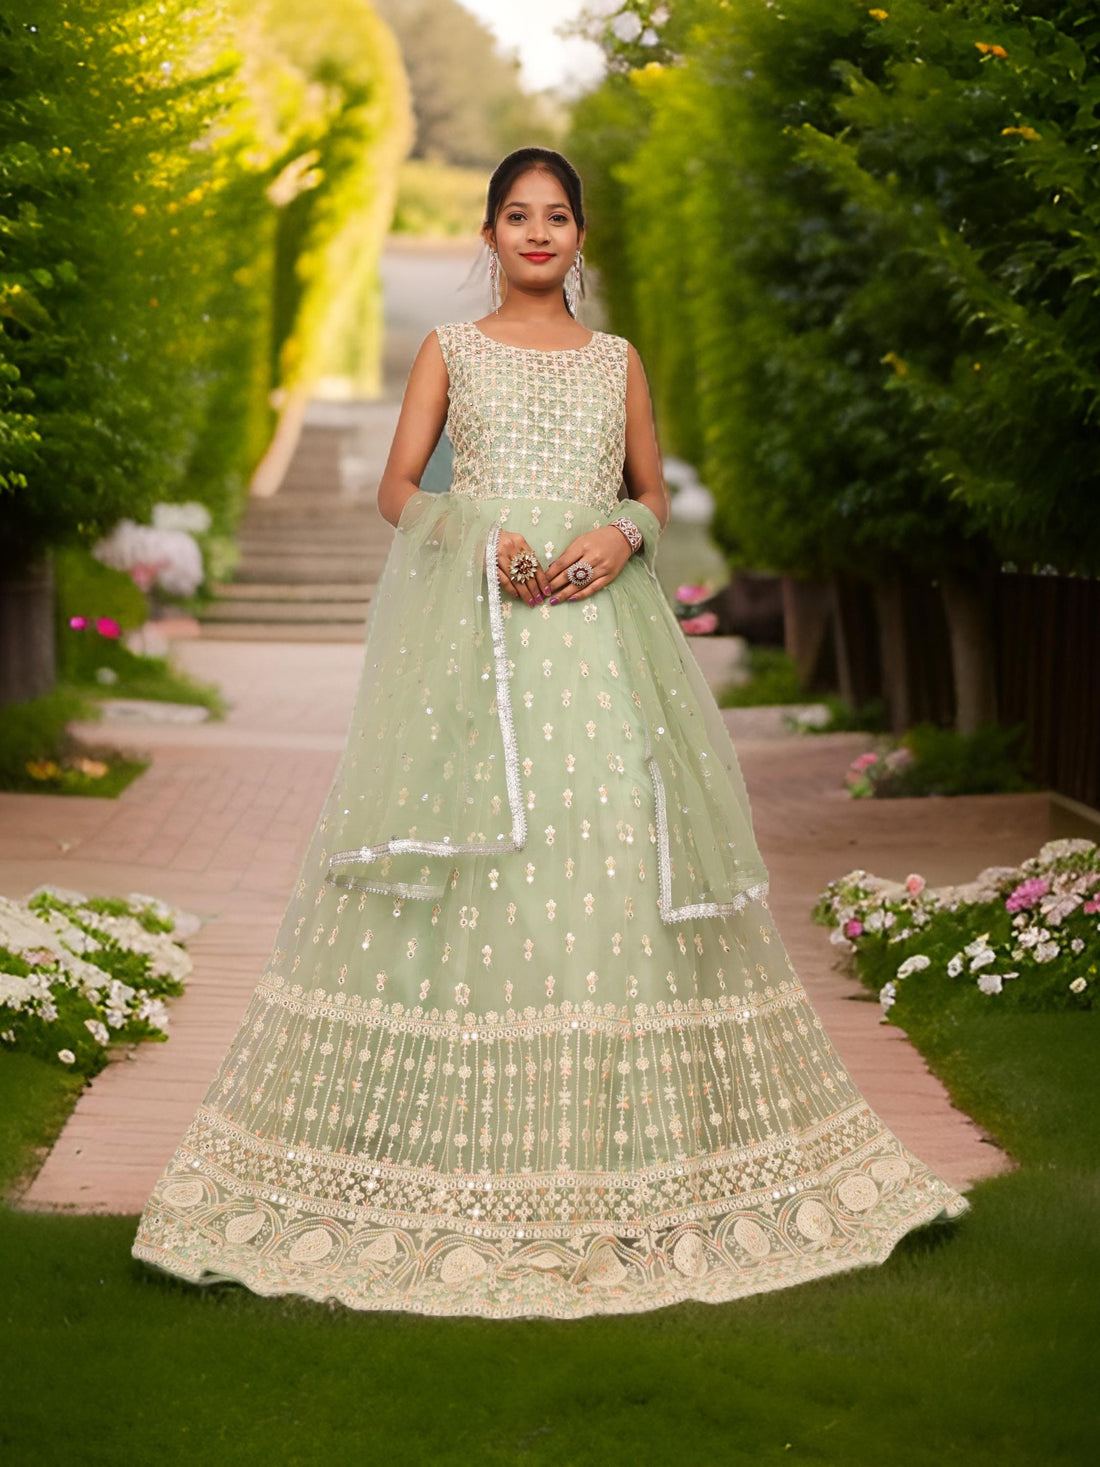 Net Fabric Gown with Sequin &amp; Embroidery Work by Shreekama Pista Green Designer Gowns for Party Festival Wedding Occasion in Noida